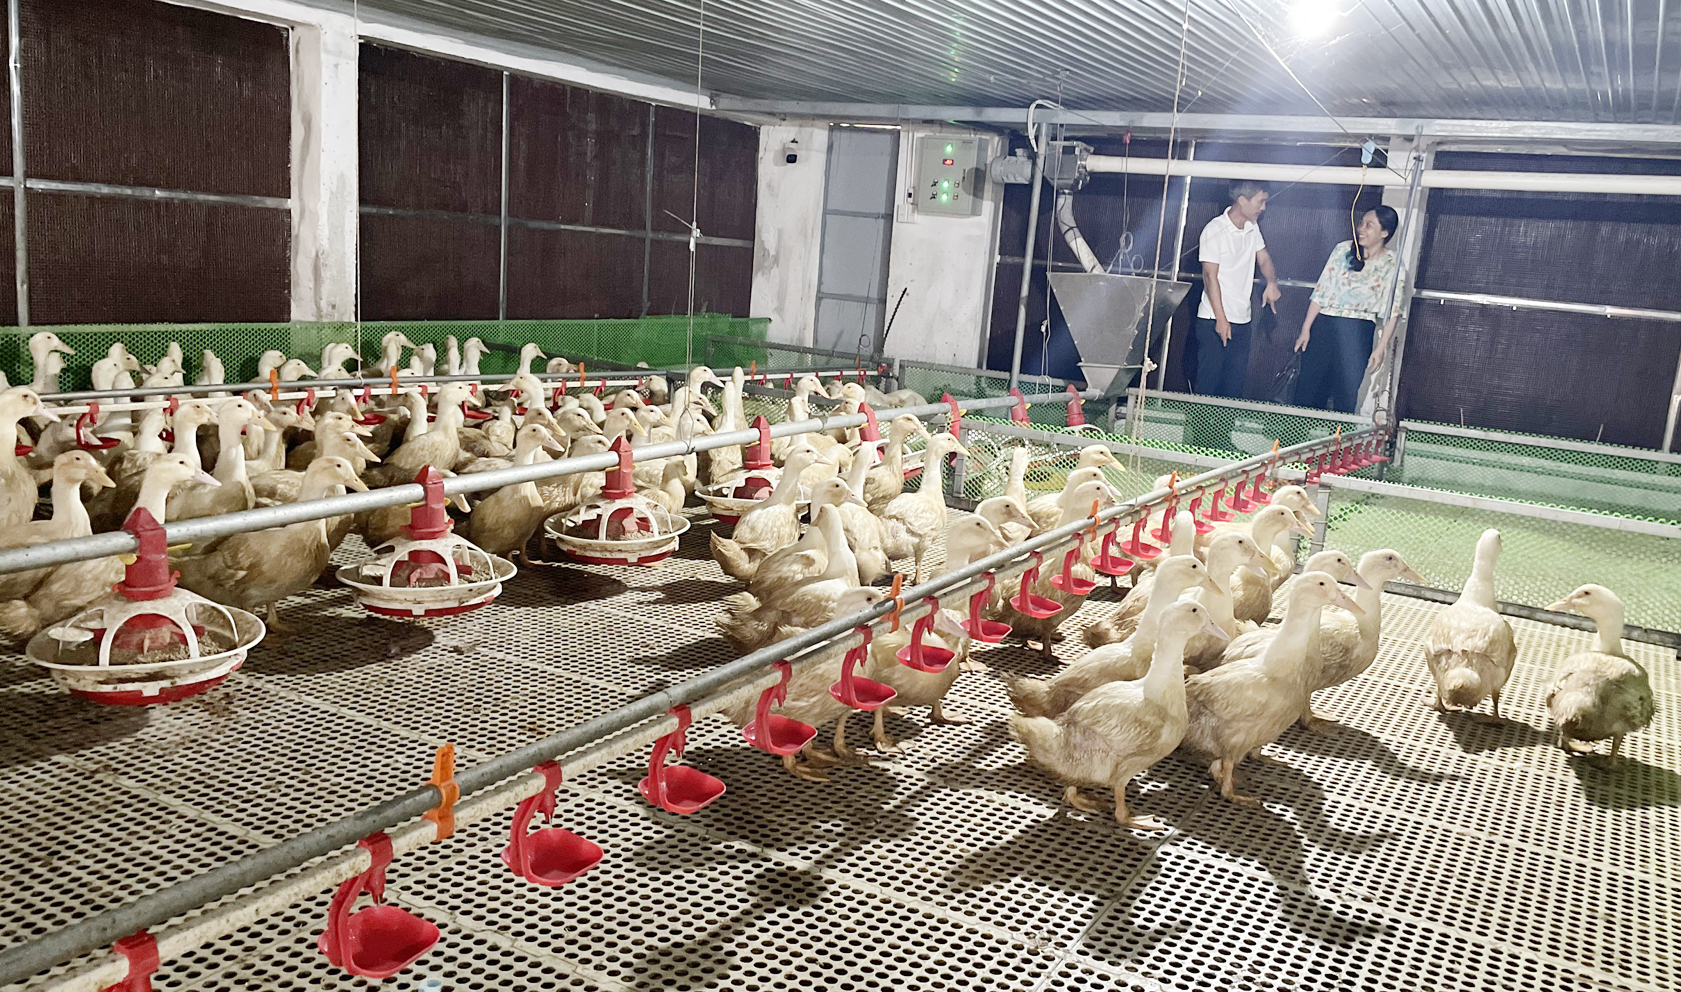 The high-tech duck farming model brings an annual profit of about 700 million VND in Le Thuy district. Photo: T. Phung.